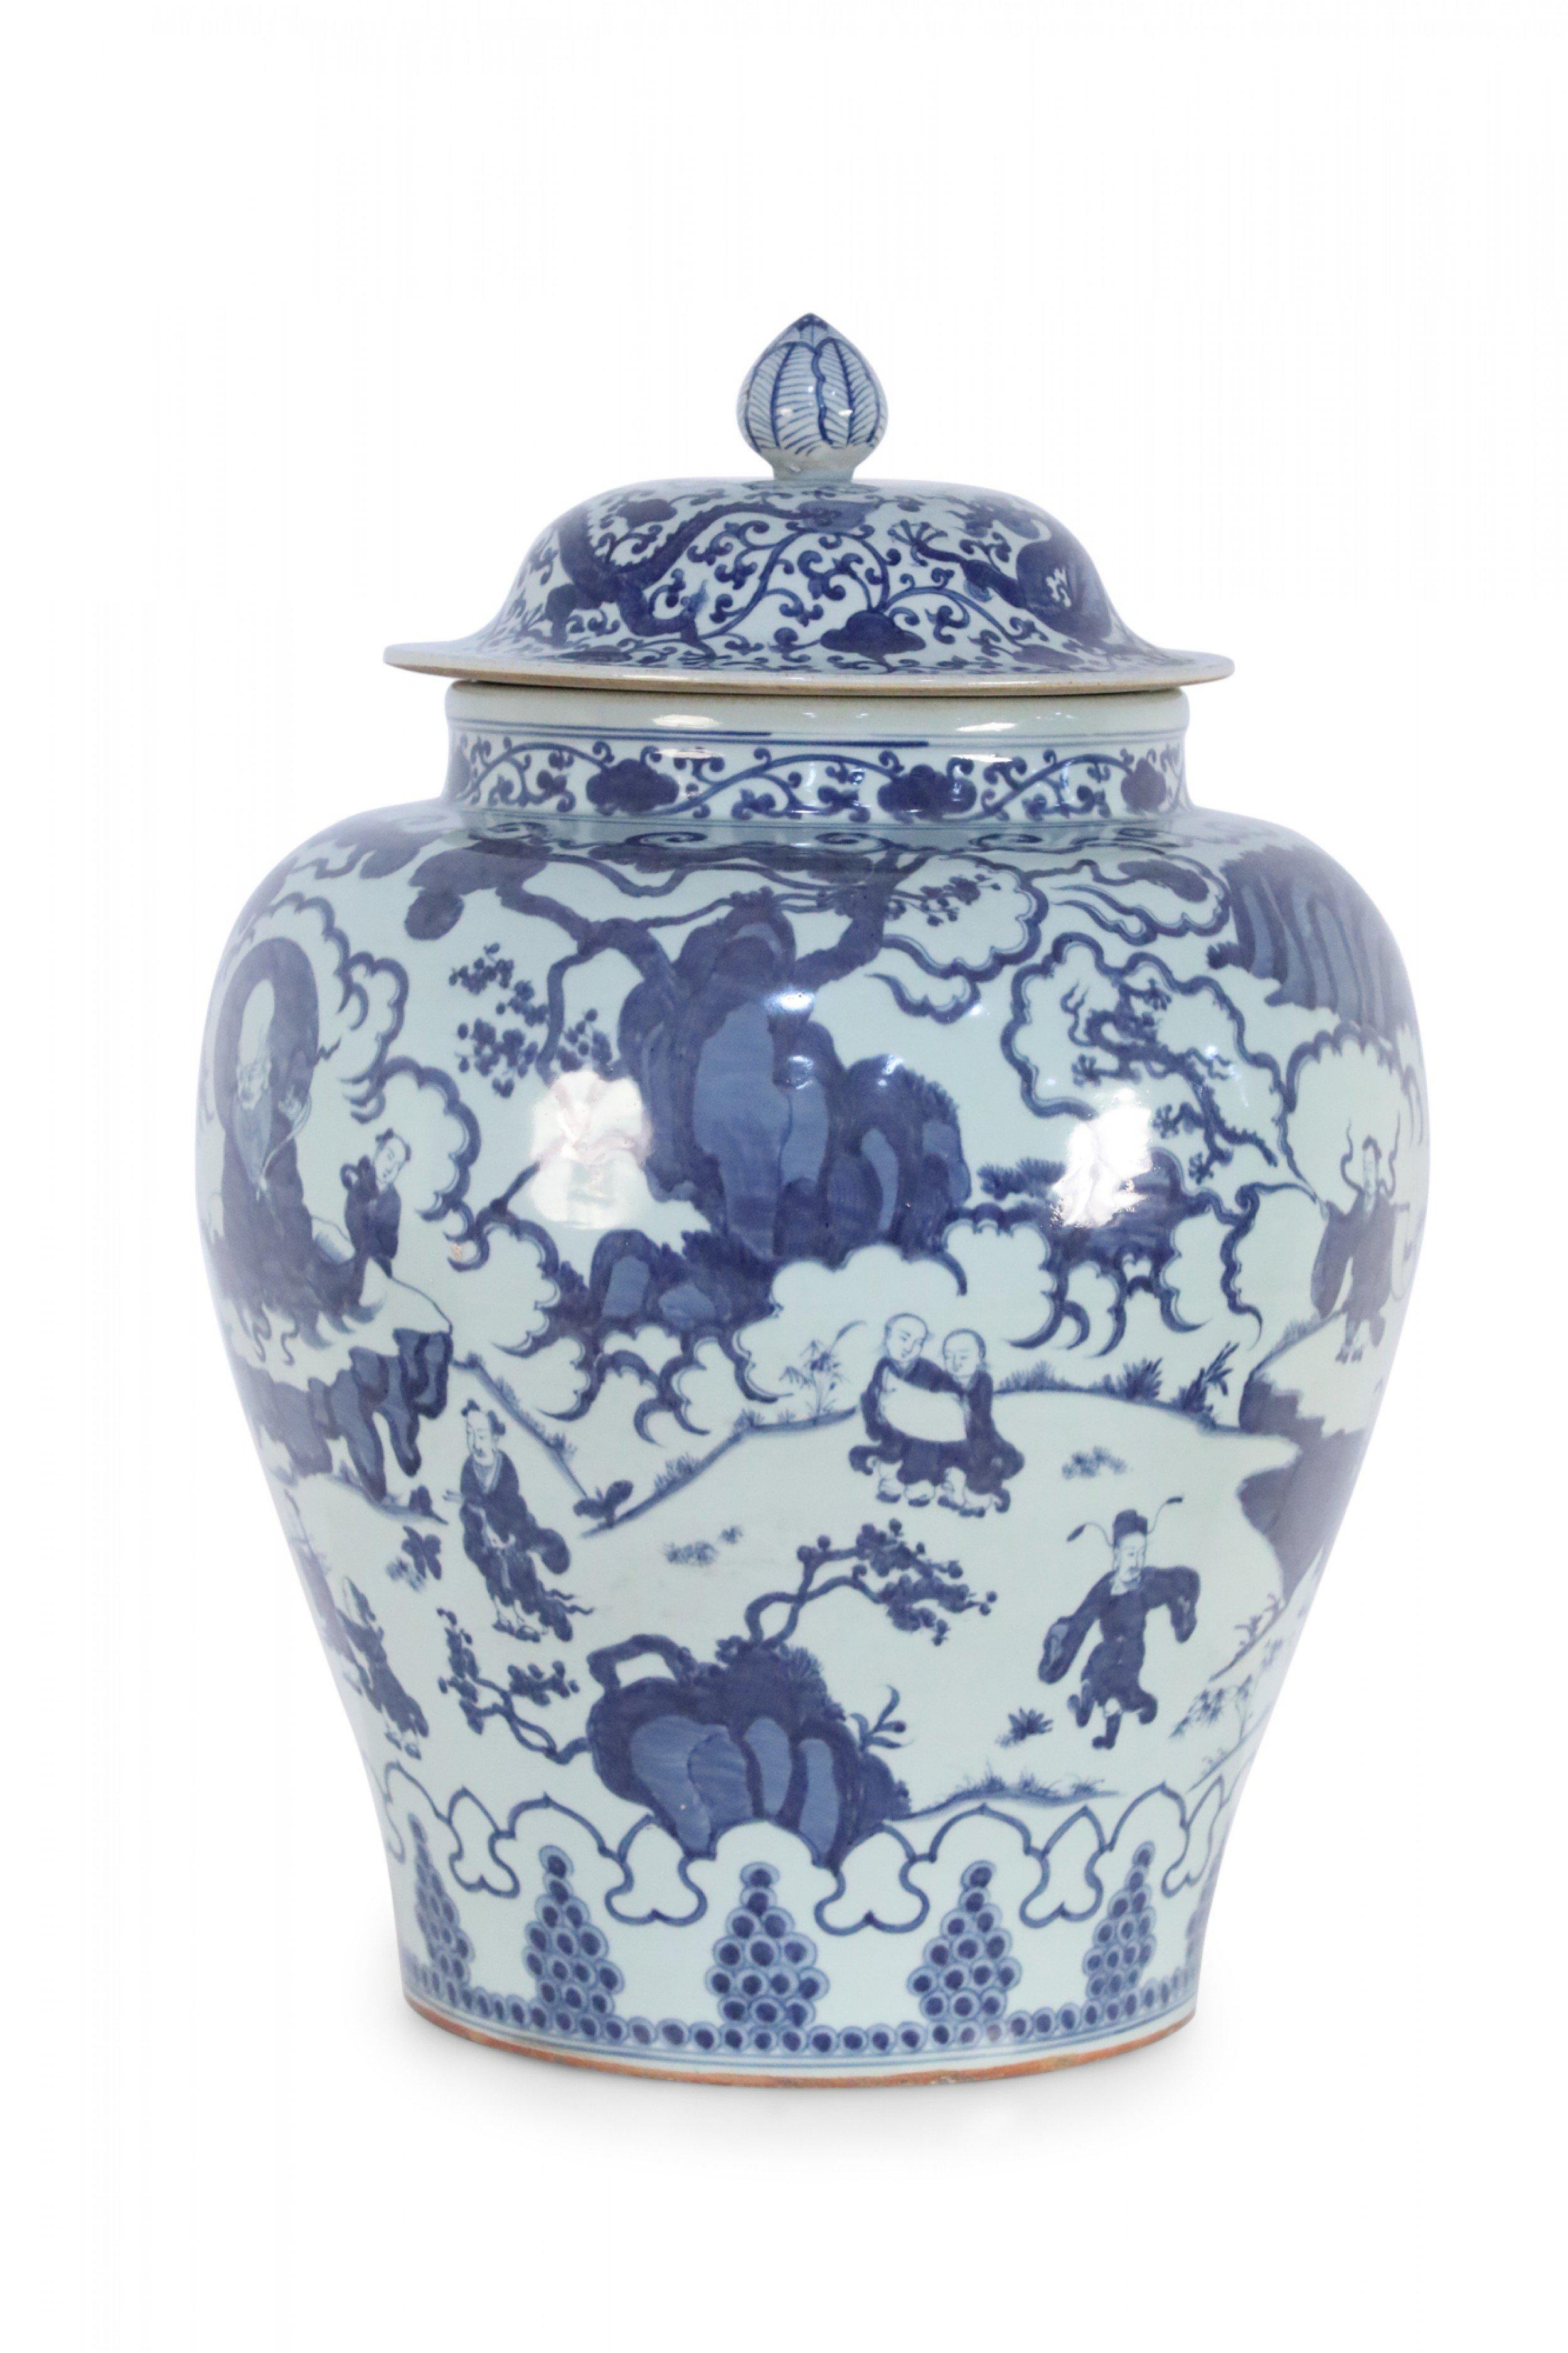 Chinese White and Blue Figurative Porcelain Ginger Jar 2